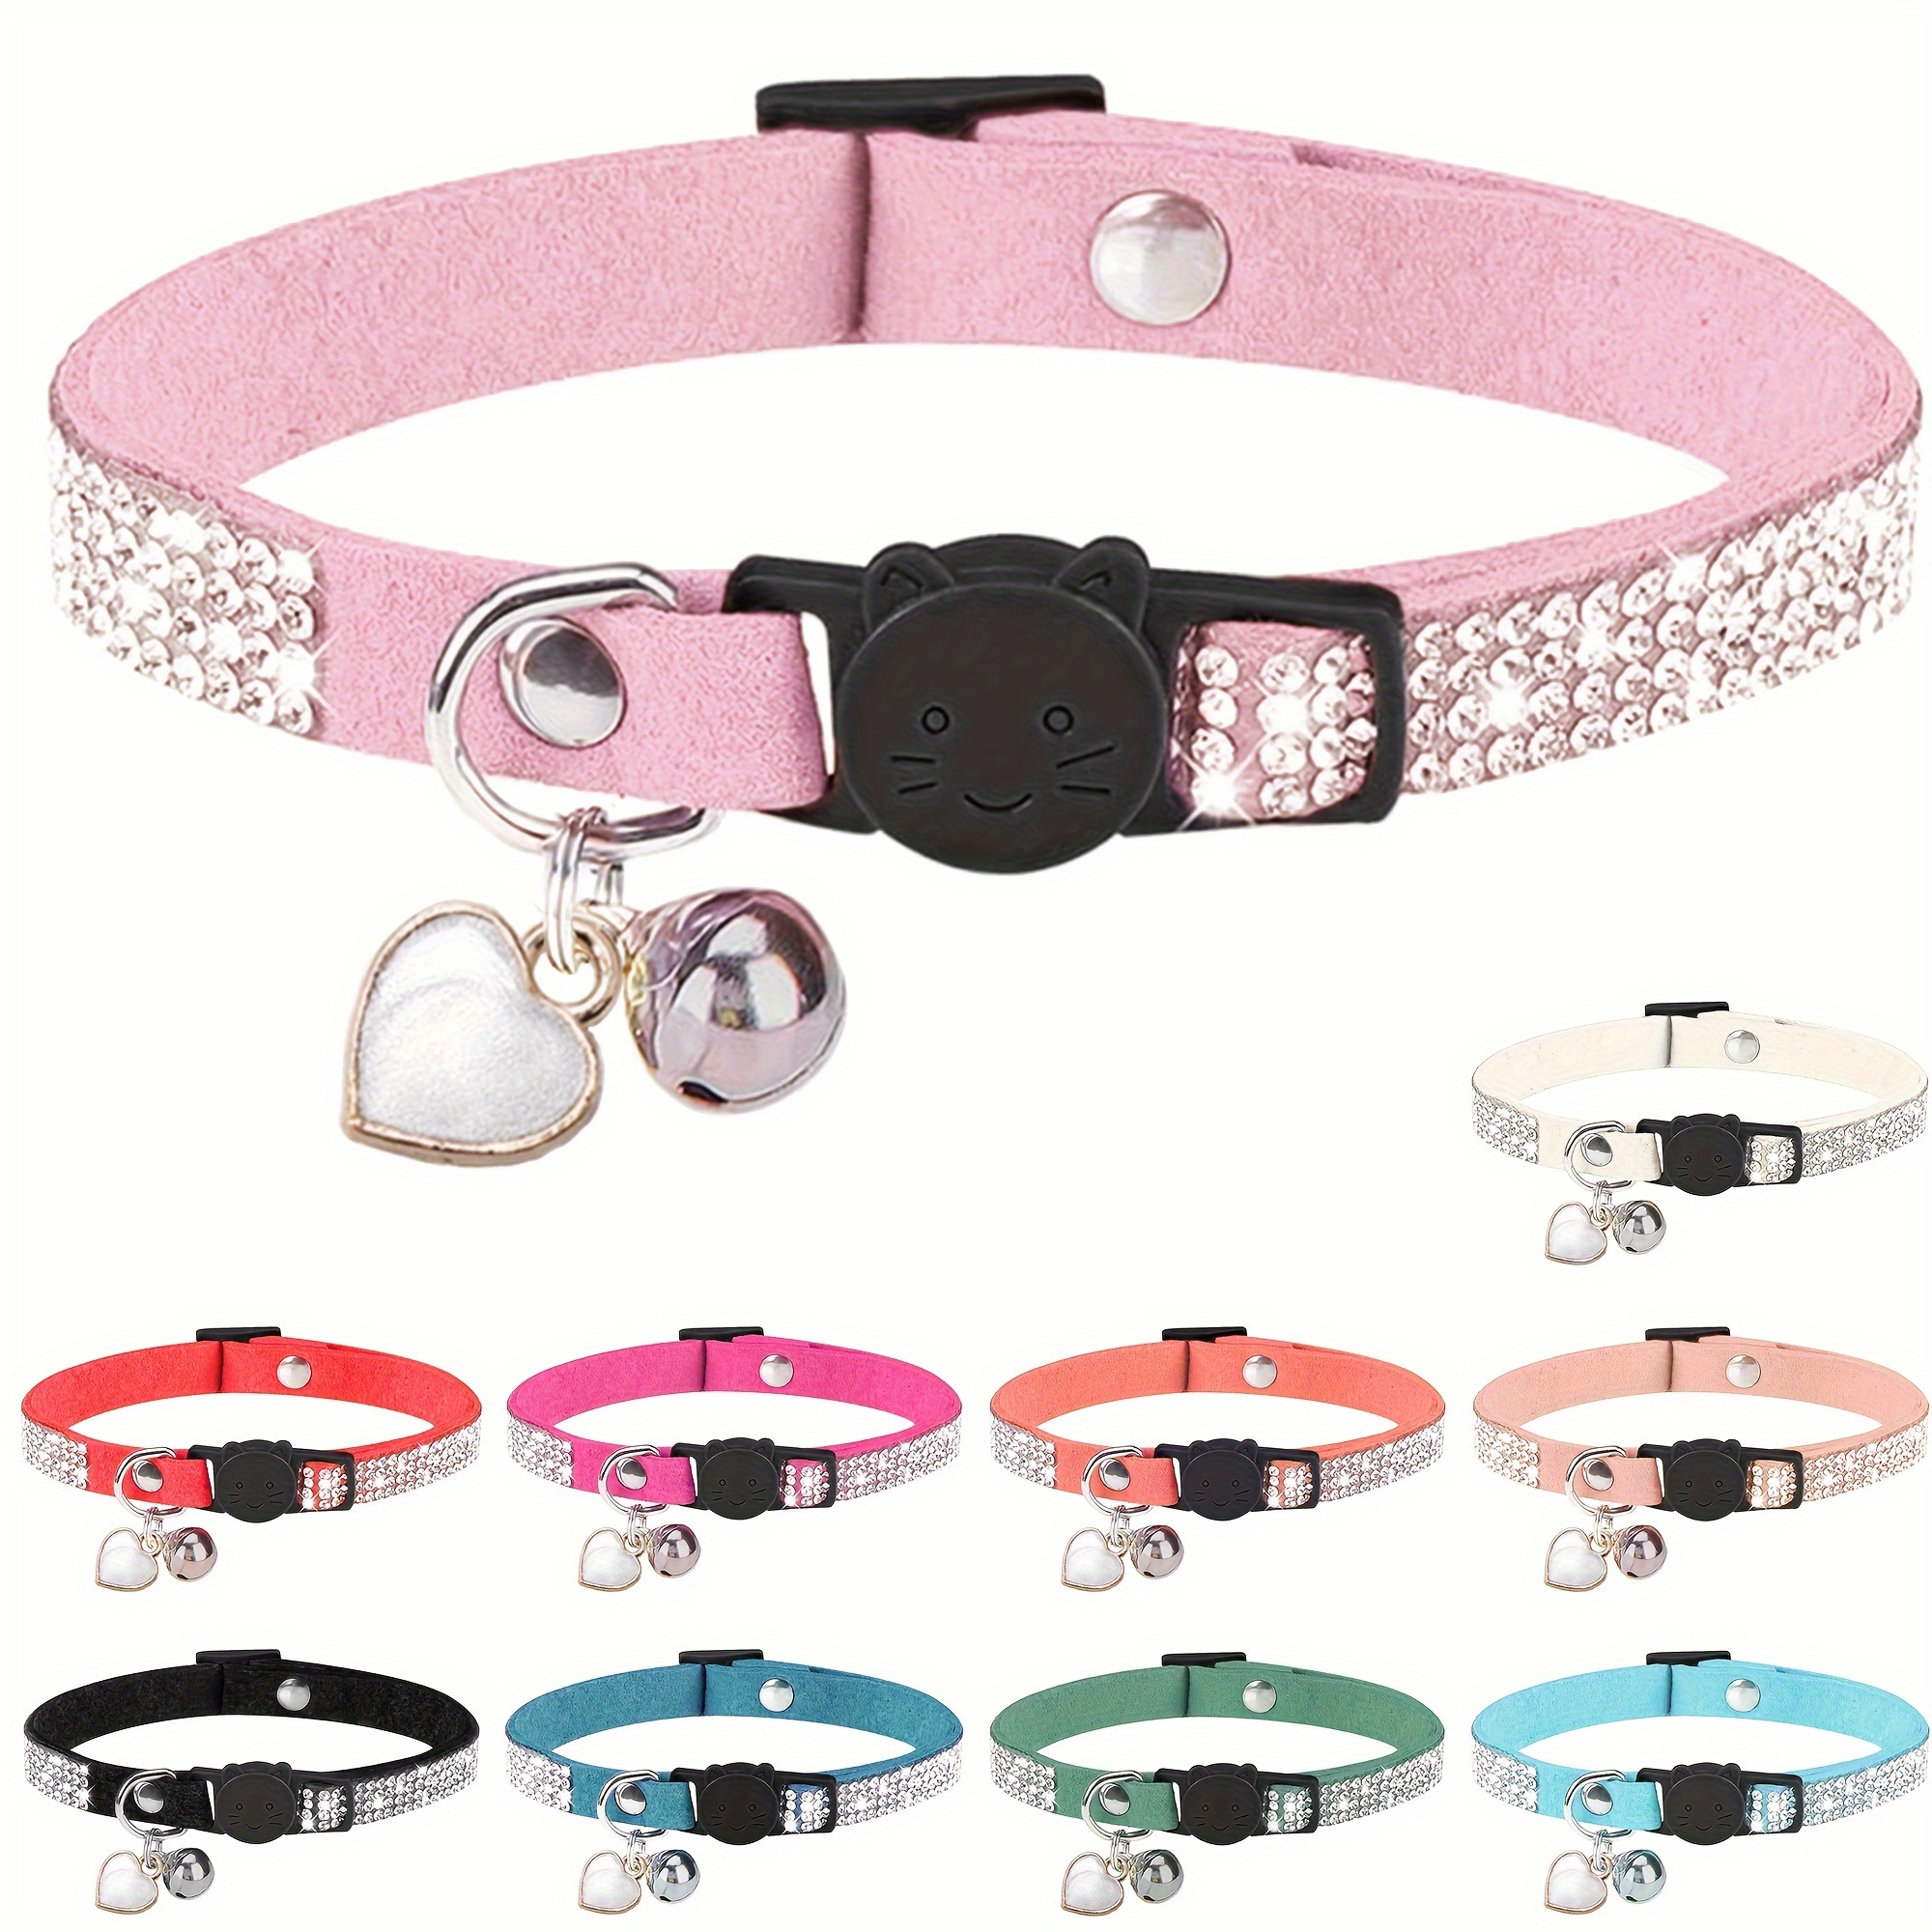 

Rhinestone Soft Velvet Cat Collar, Breakaway Cat Collar With Bell And Pendant, Adjustable Kitten Collar With Quick Release Safety Buckle Pet Accessories